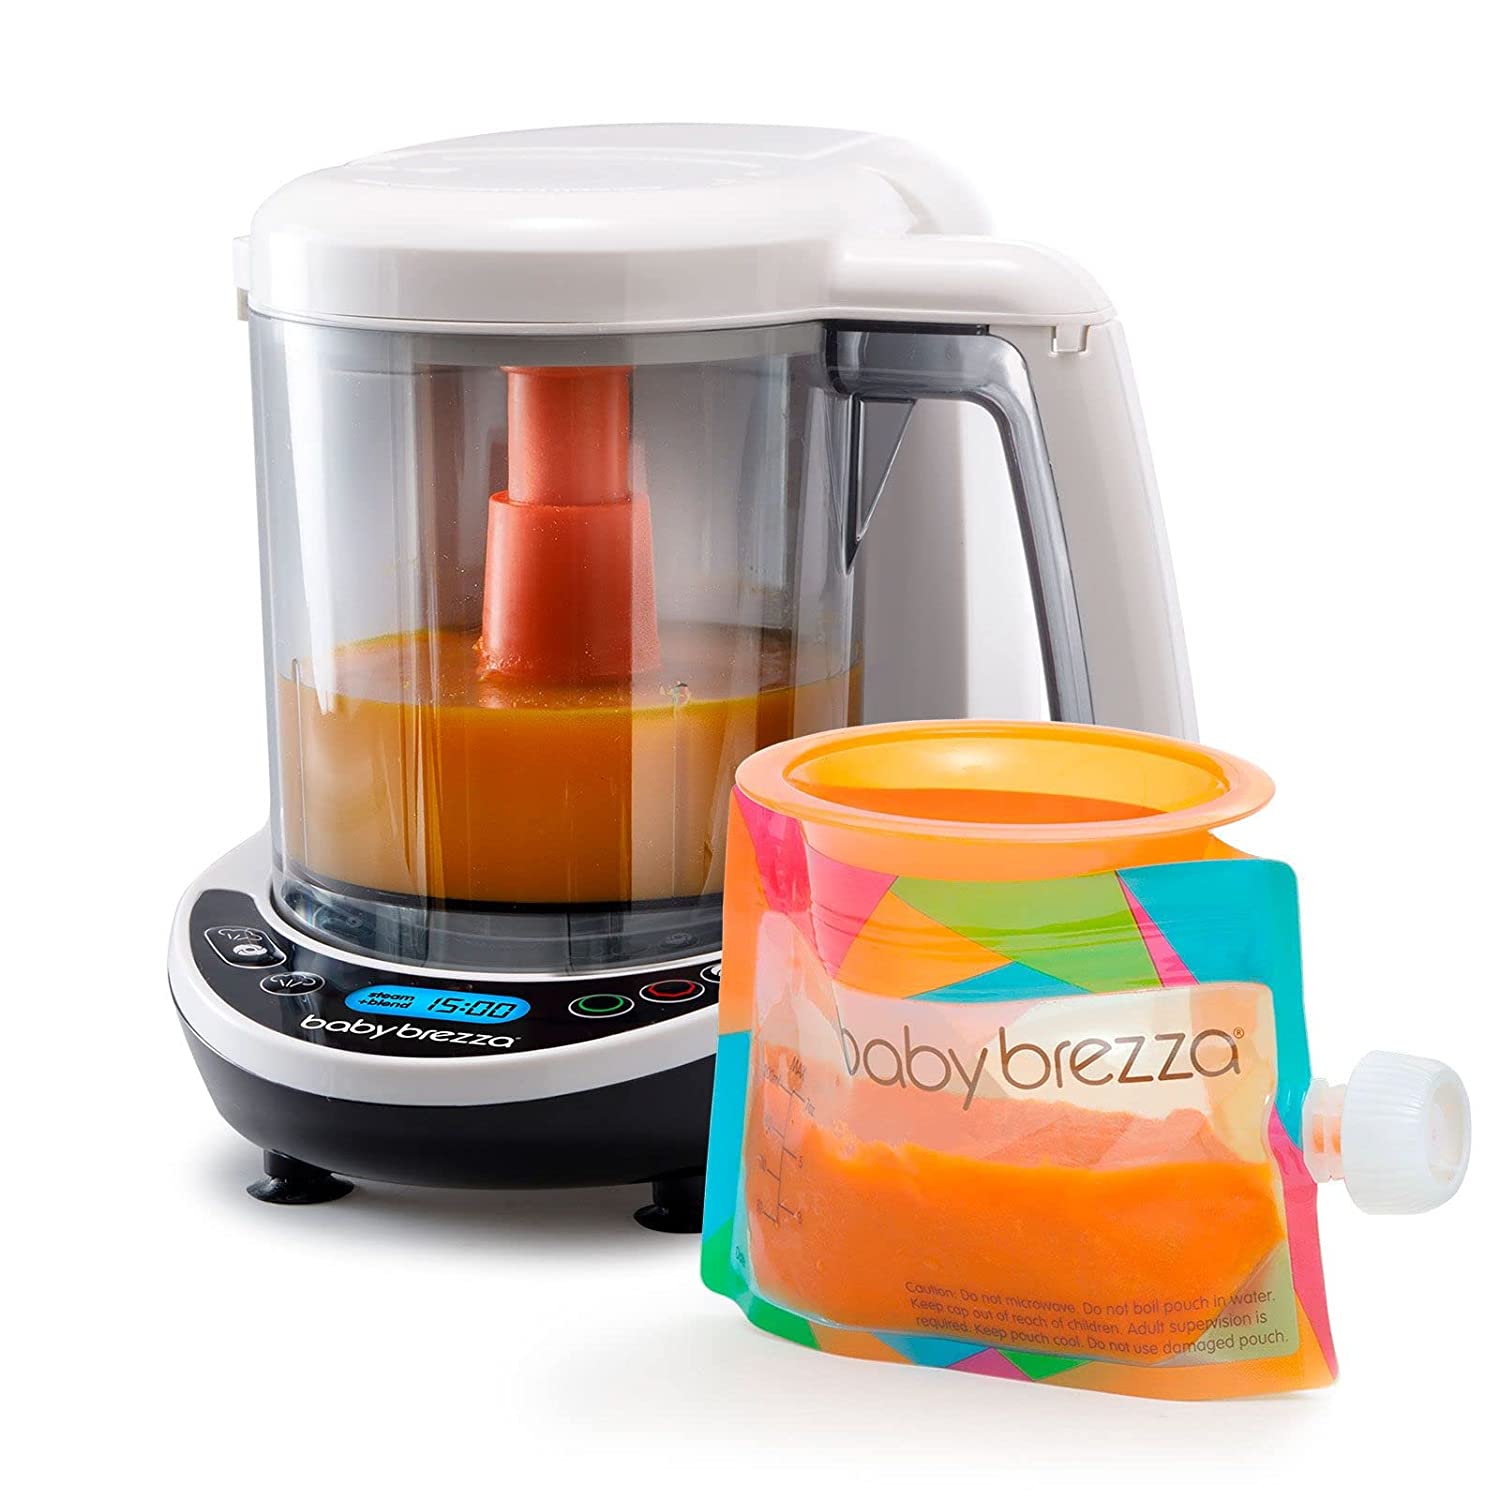 Baby Brezza Automatic Steam & Blend Baby Food Maker